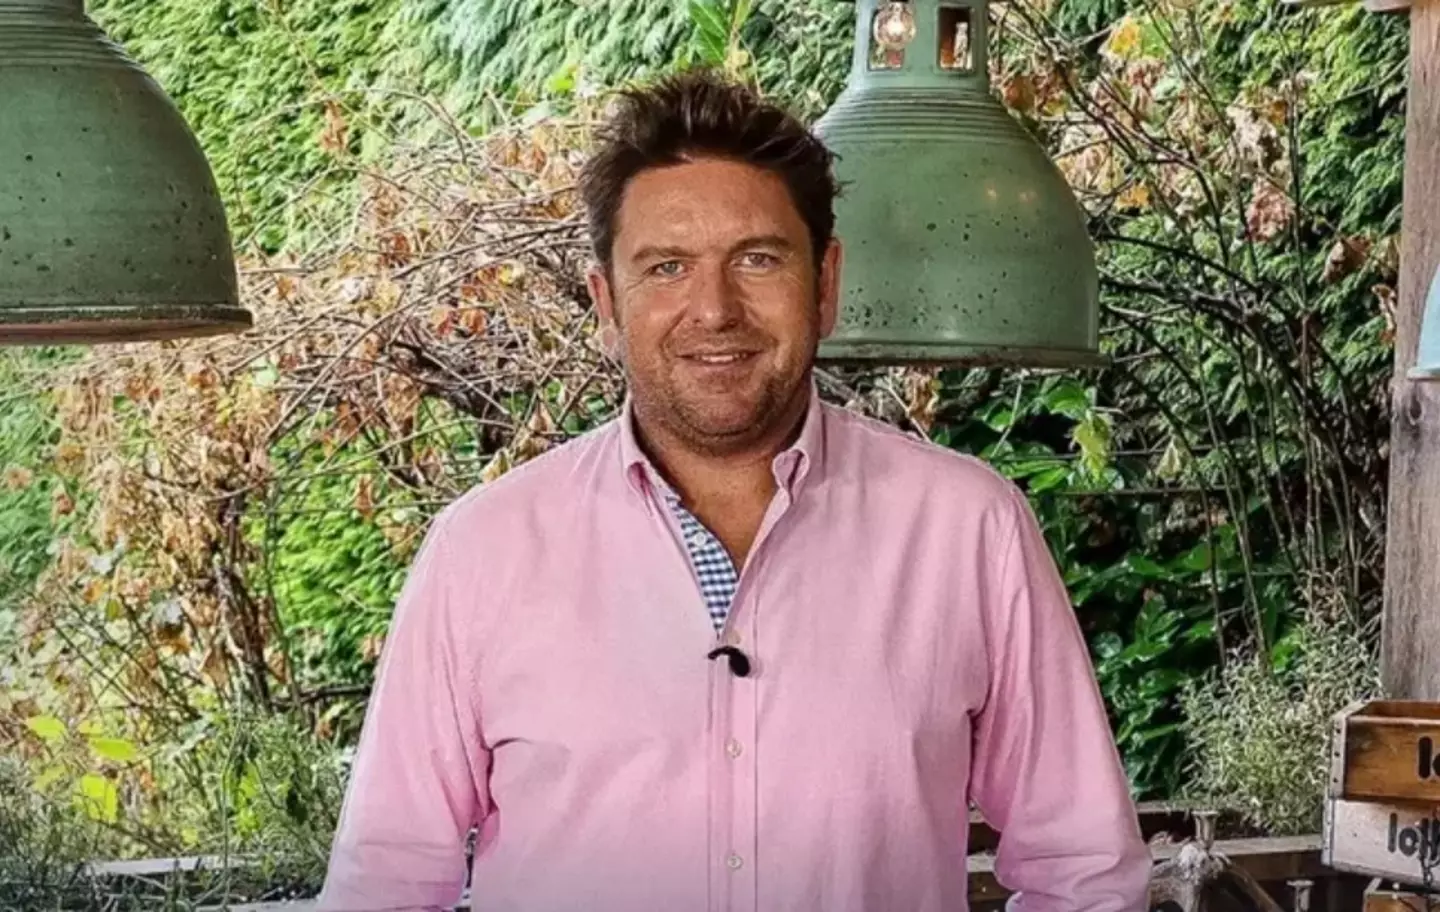 James Martin has worked with ITV since 2017.